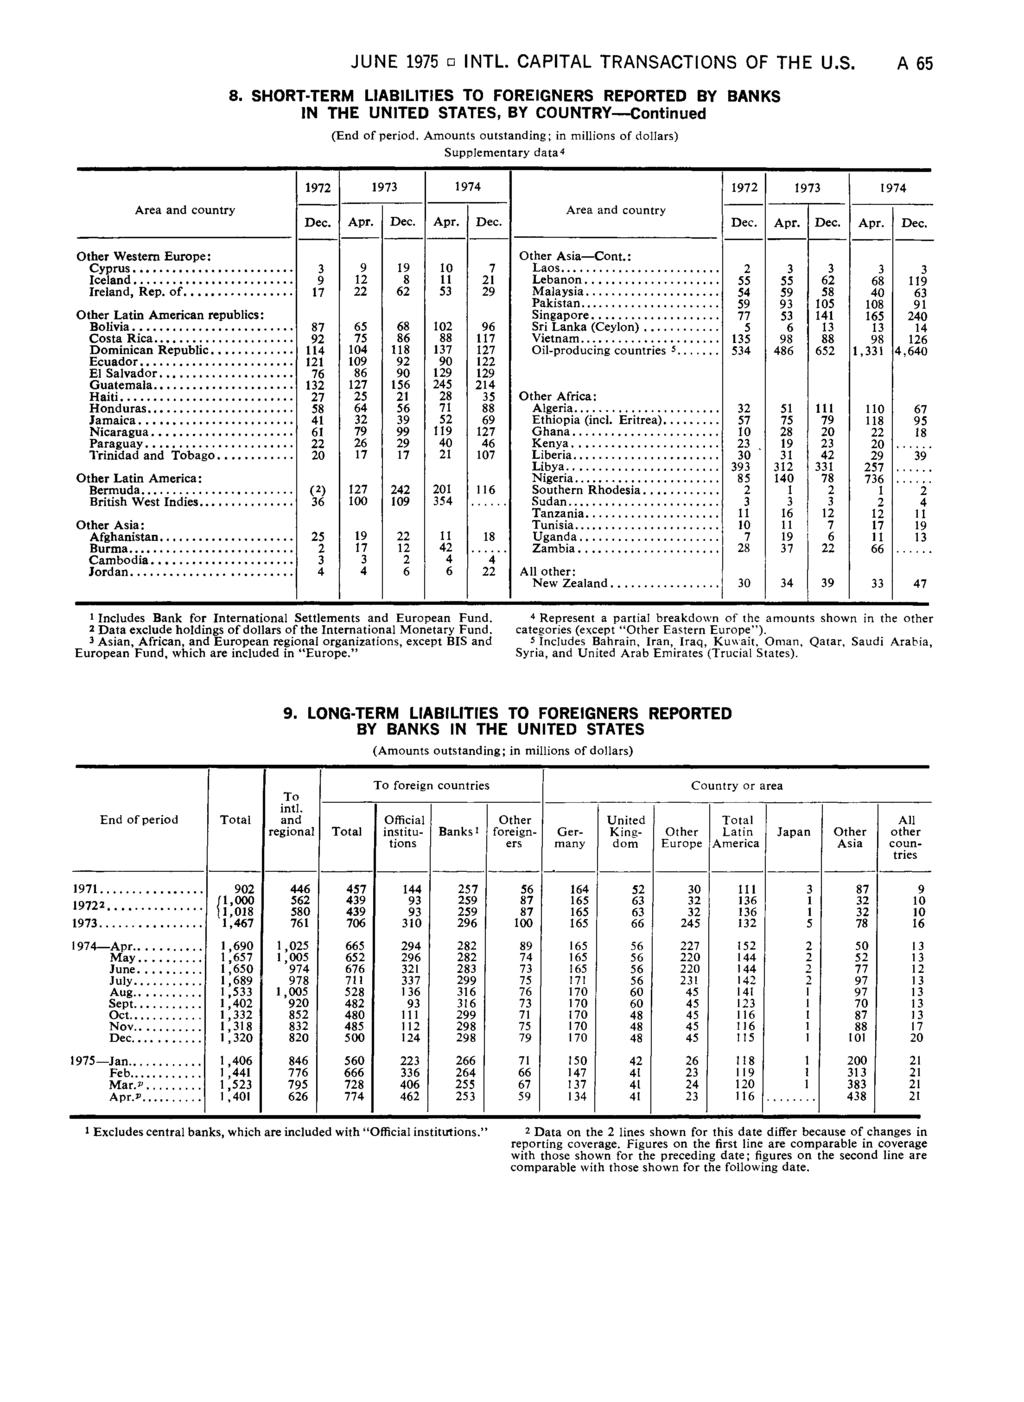 JUNE 1975 INTL. CAPITAL TRANSACTIONS OF THE U.S. A 65 8. SH O RT-TERM LIABILITIES TO FO REIG N ER S REPO RTED BY BANKS IN THE UNITED STATES, BY COUNTRY C o n tin u e d (End of period.